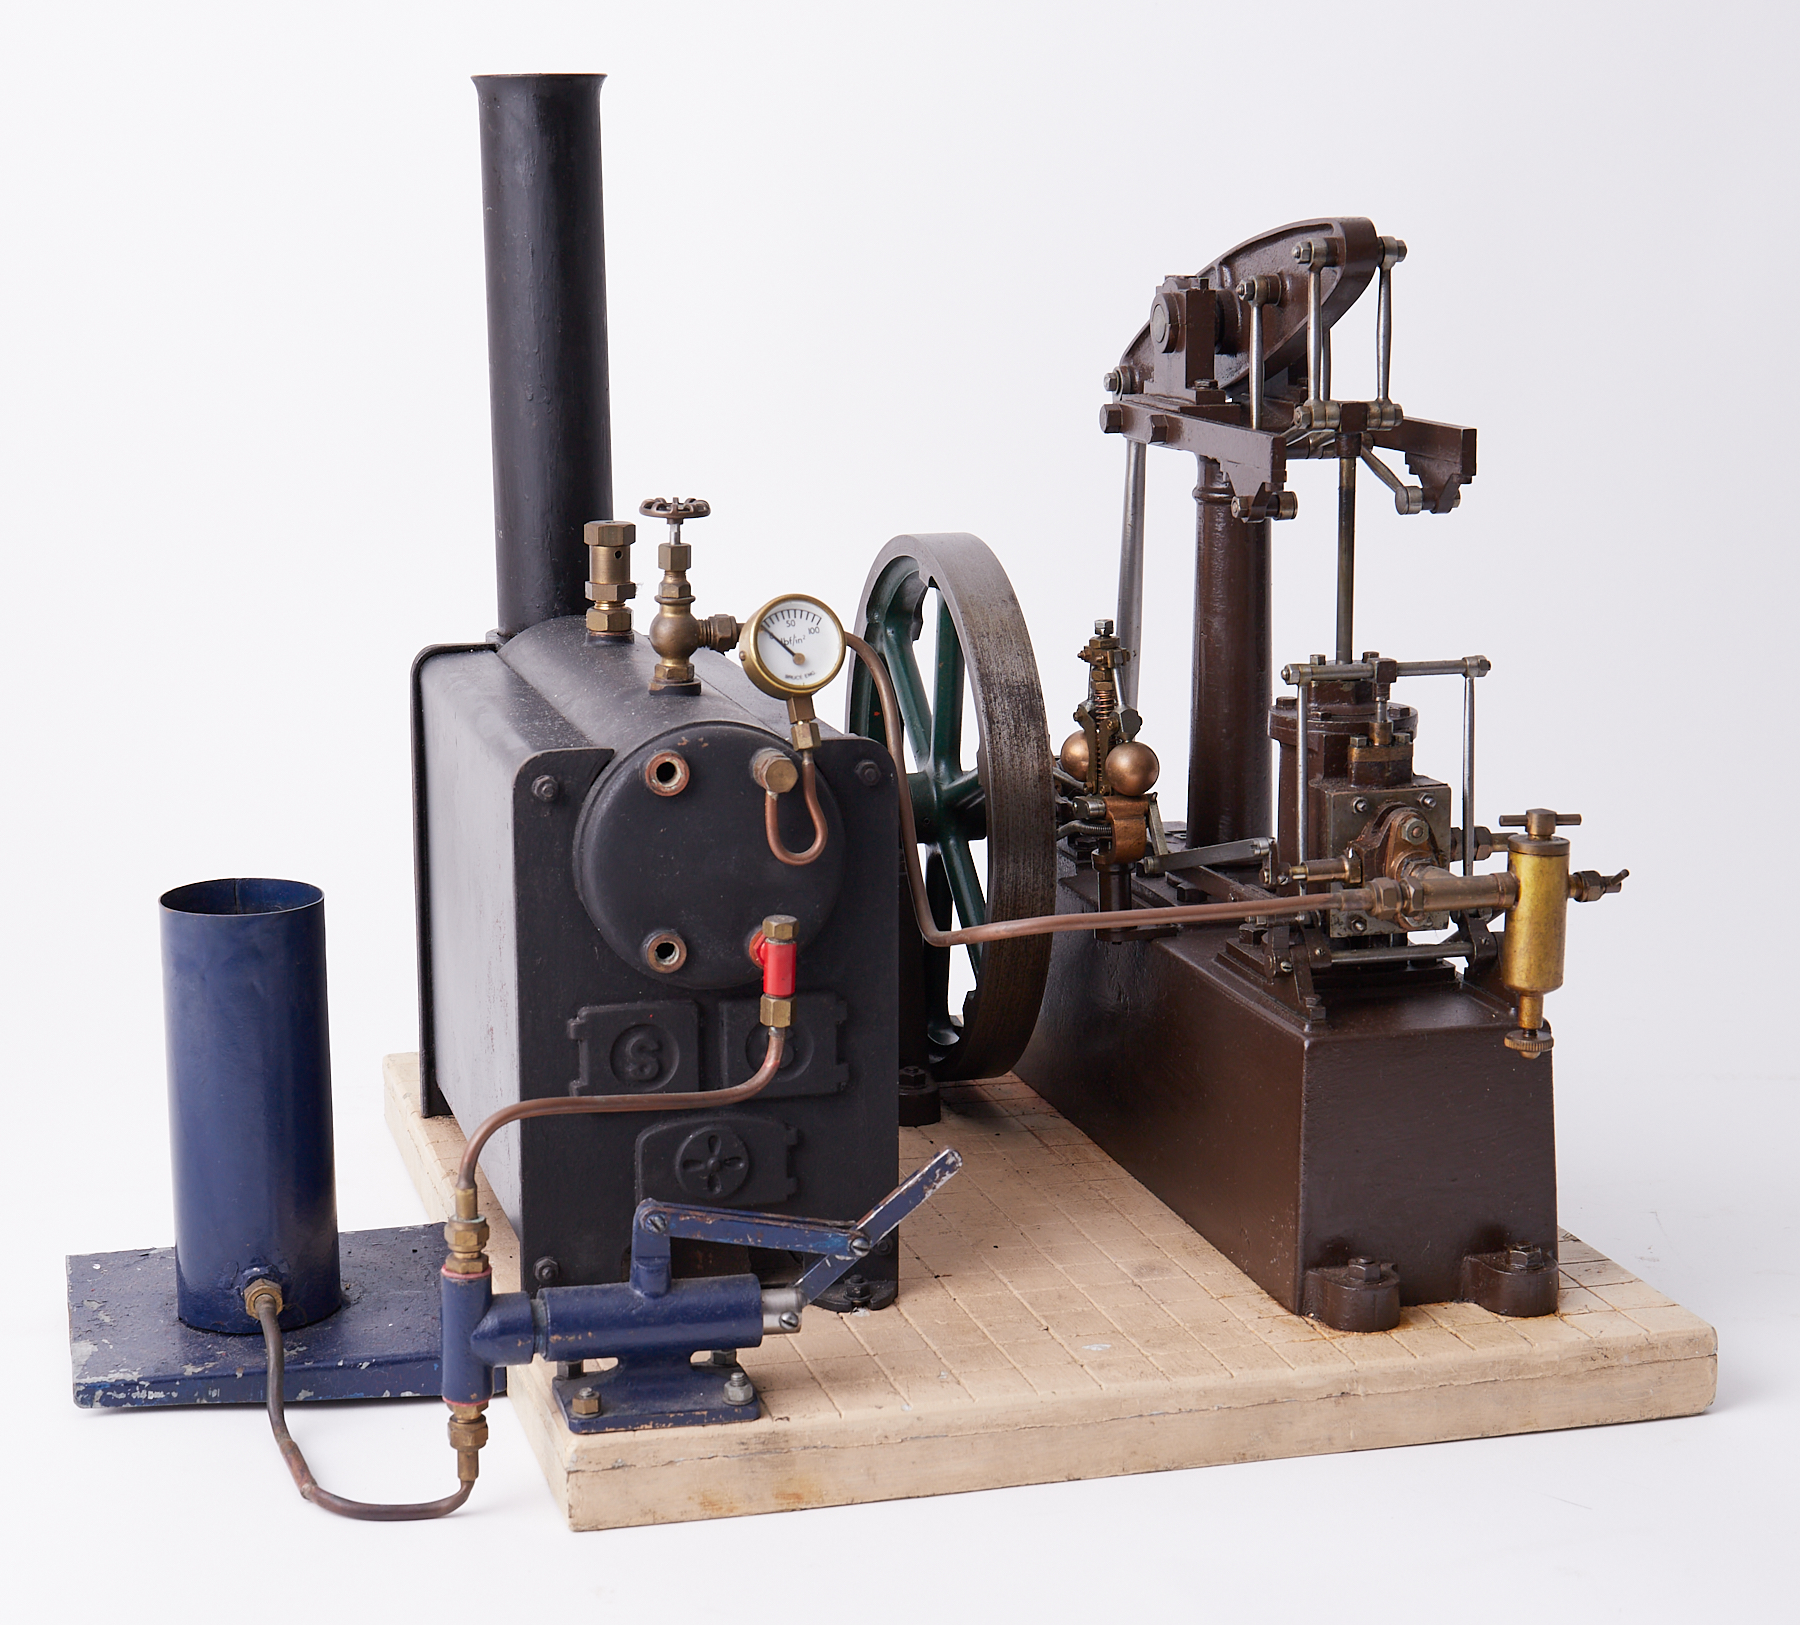 A Stuart steam engine with boiler and manual feed pump, 13" high with 12" base.